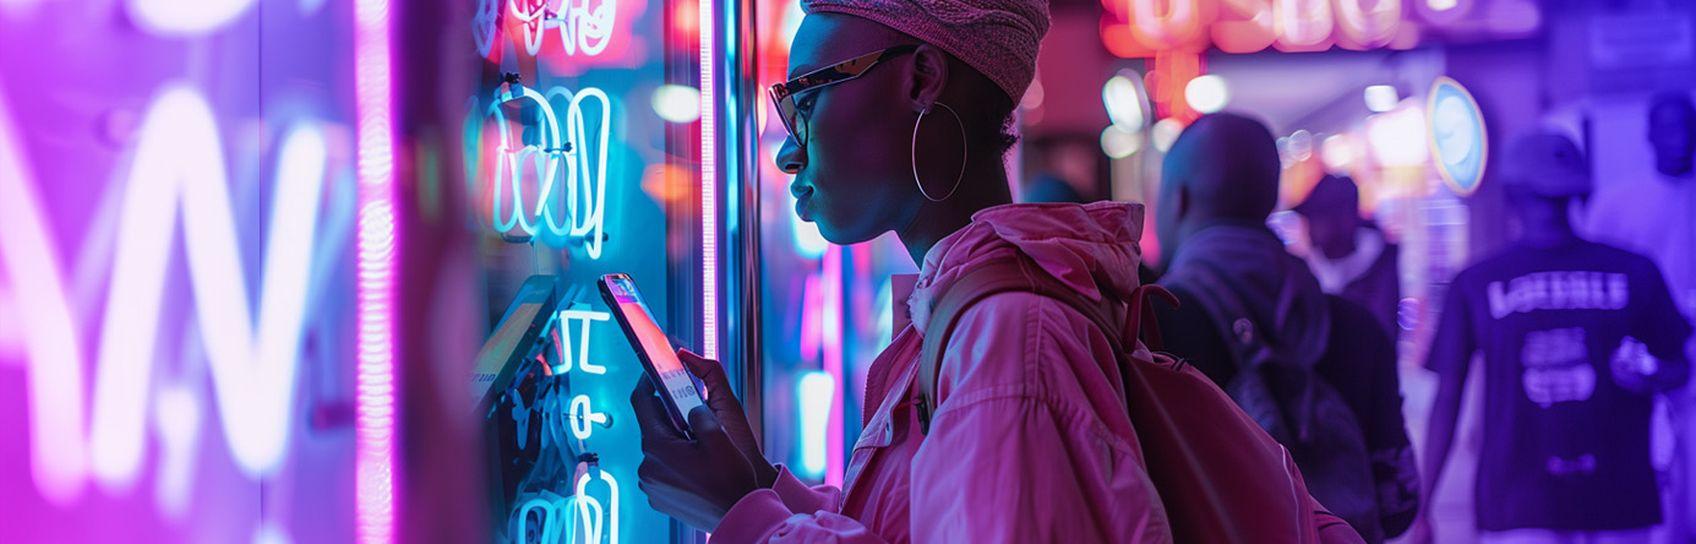 A lady checking on her mobile phone whilst window shopping with neon lights and people in the background